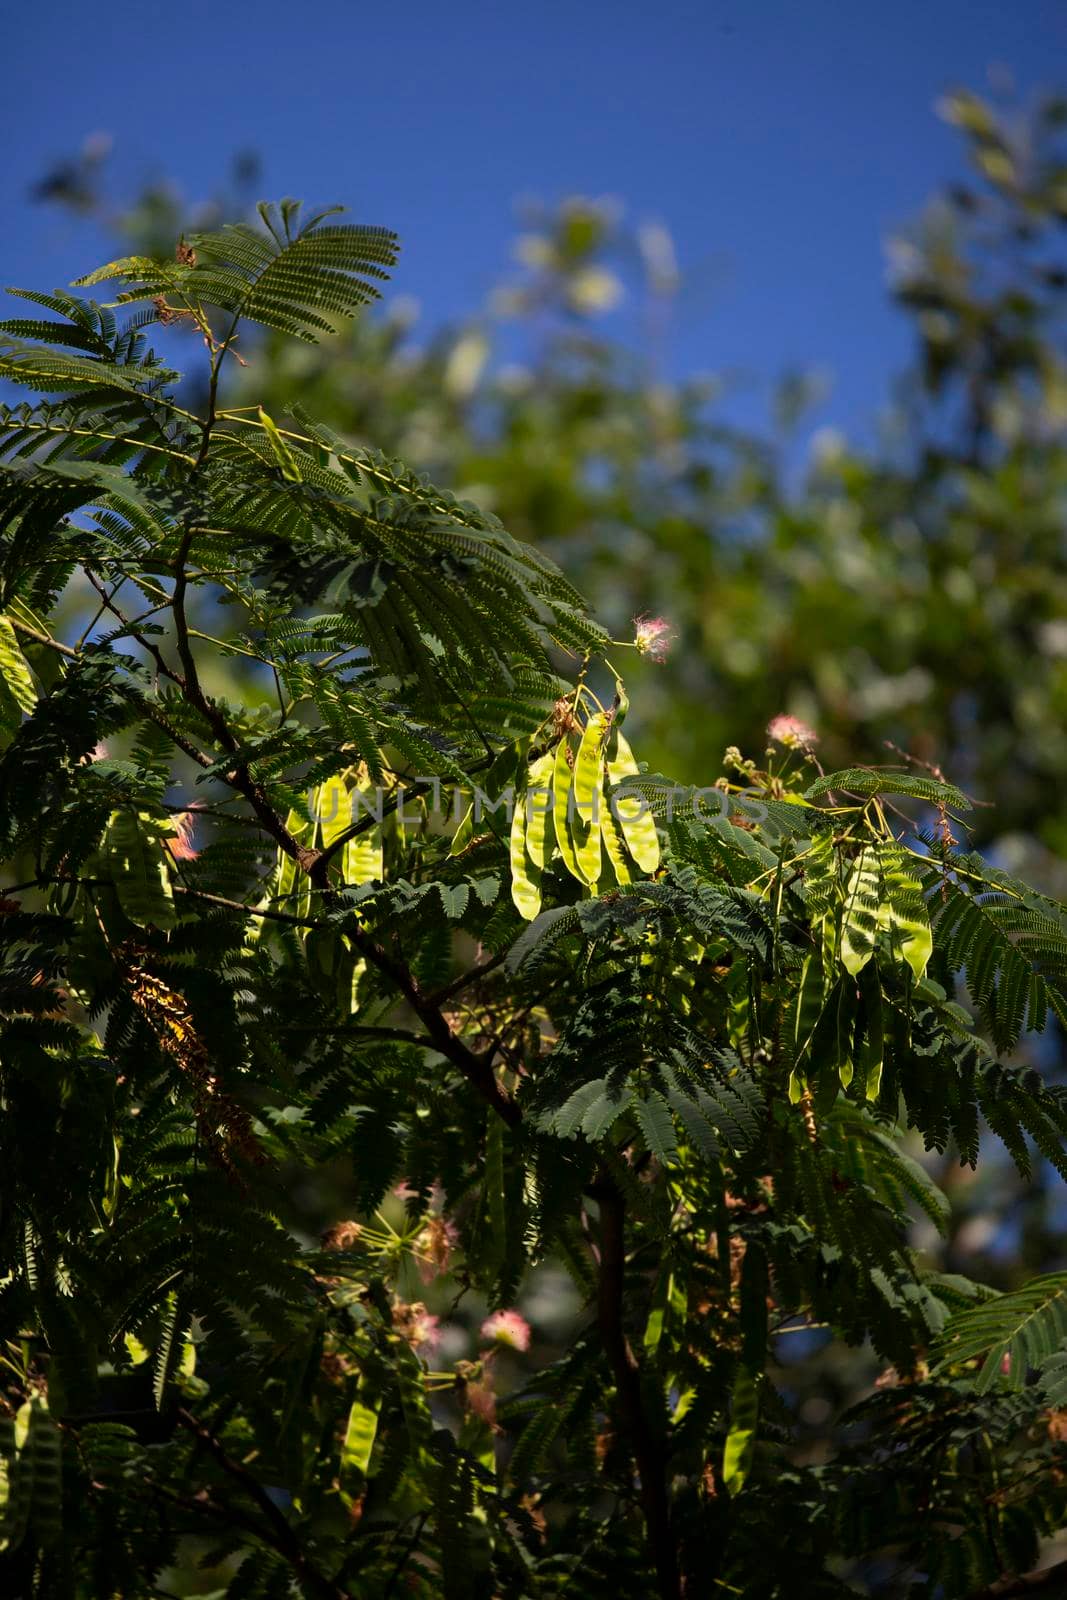 Seeds on a Mimosa Tree by tornado98